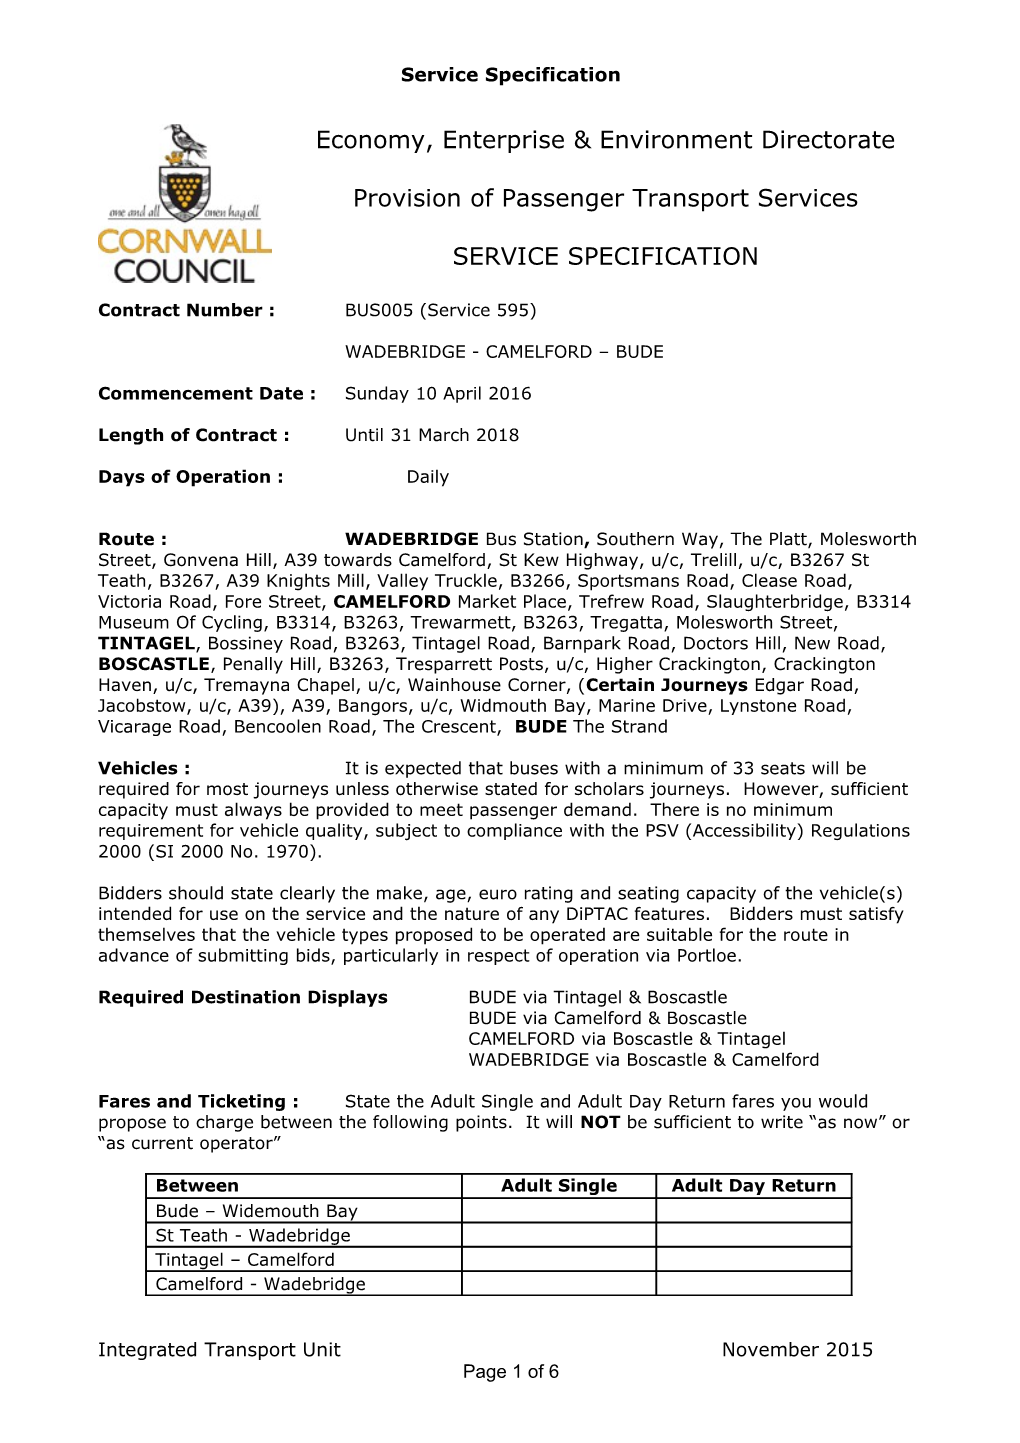 Service Specification - Local Bus Service - Schedule 1A